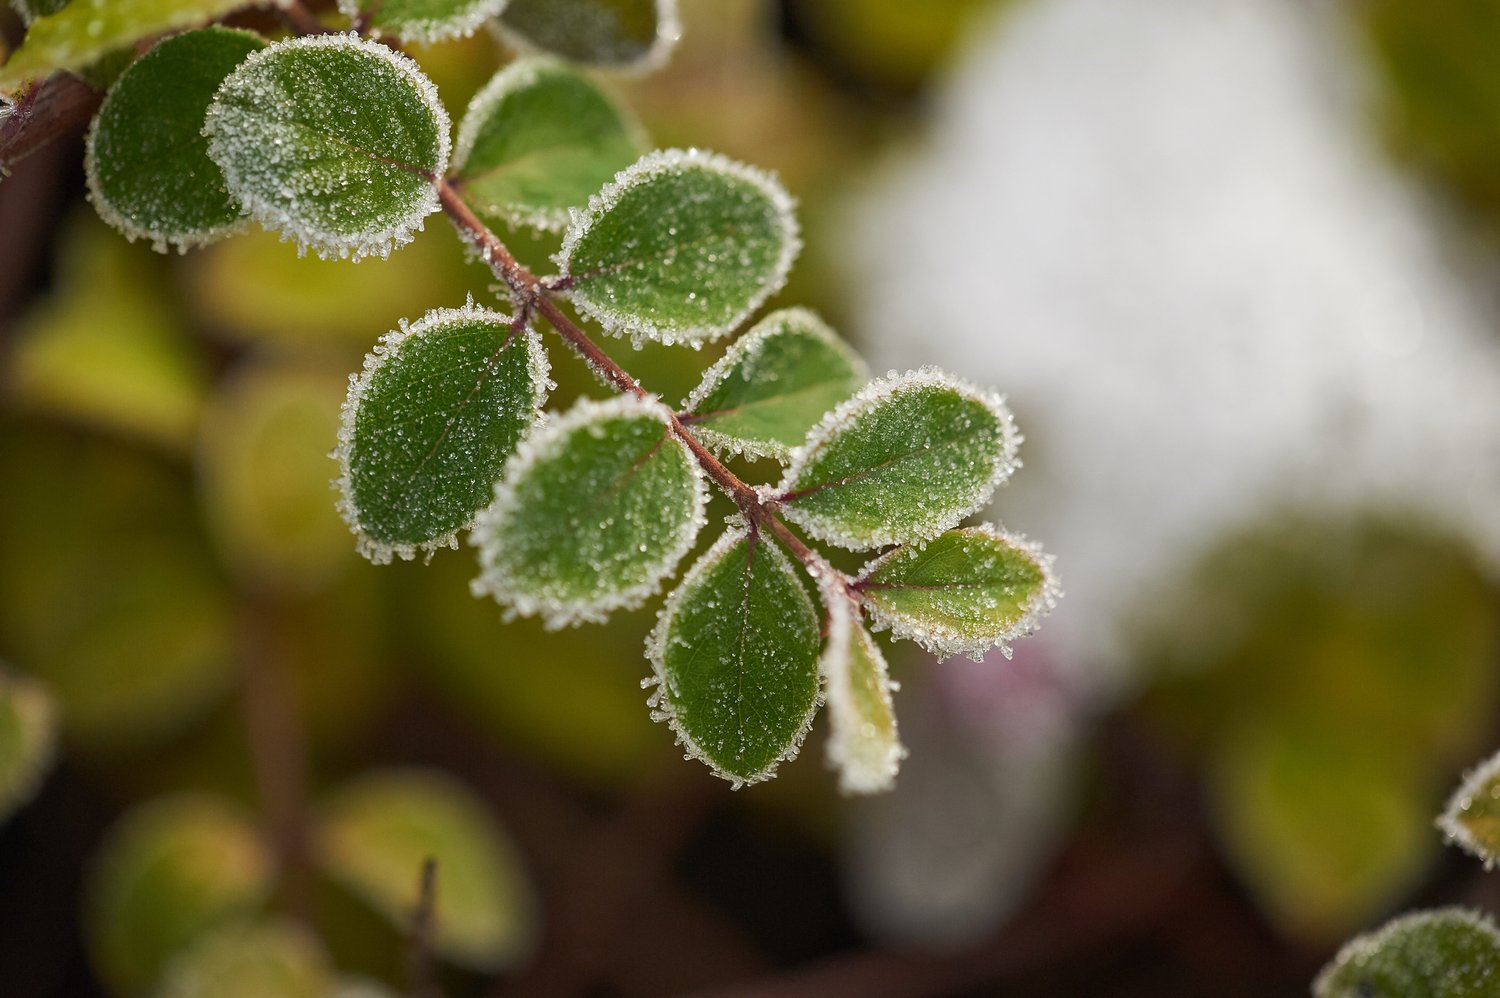 Dammann's Garden Company – When and How to Prune Your Frost-Damaged Plants